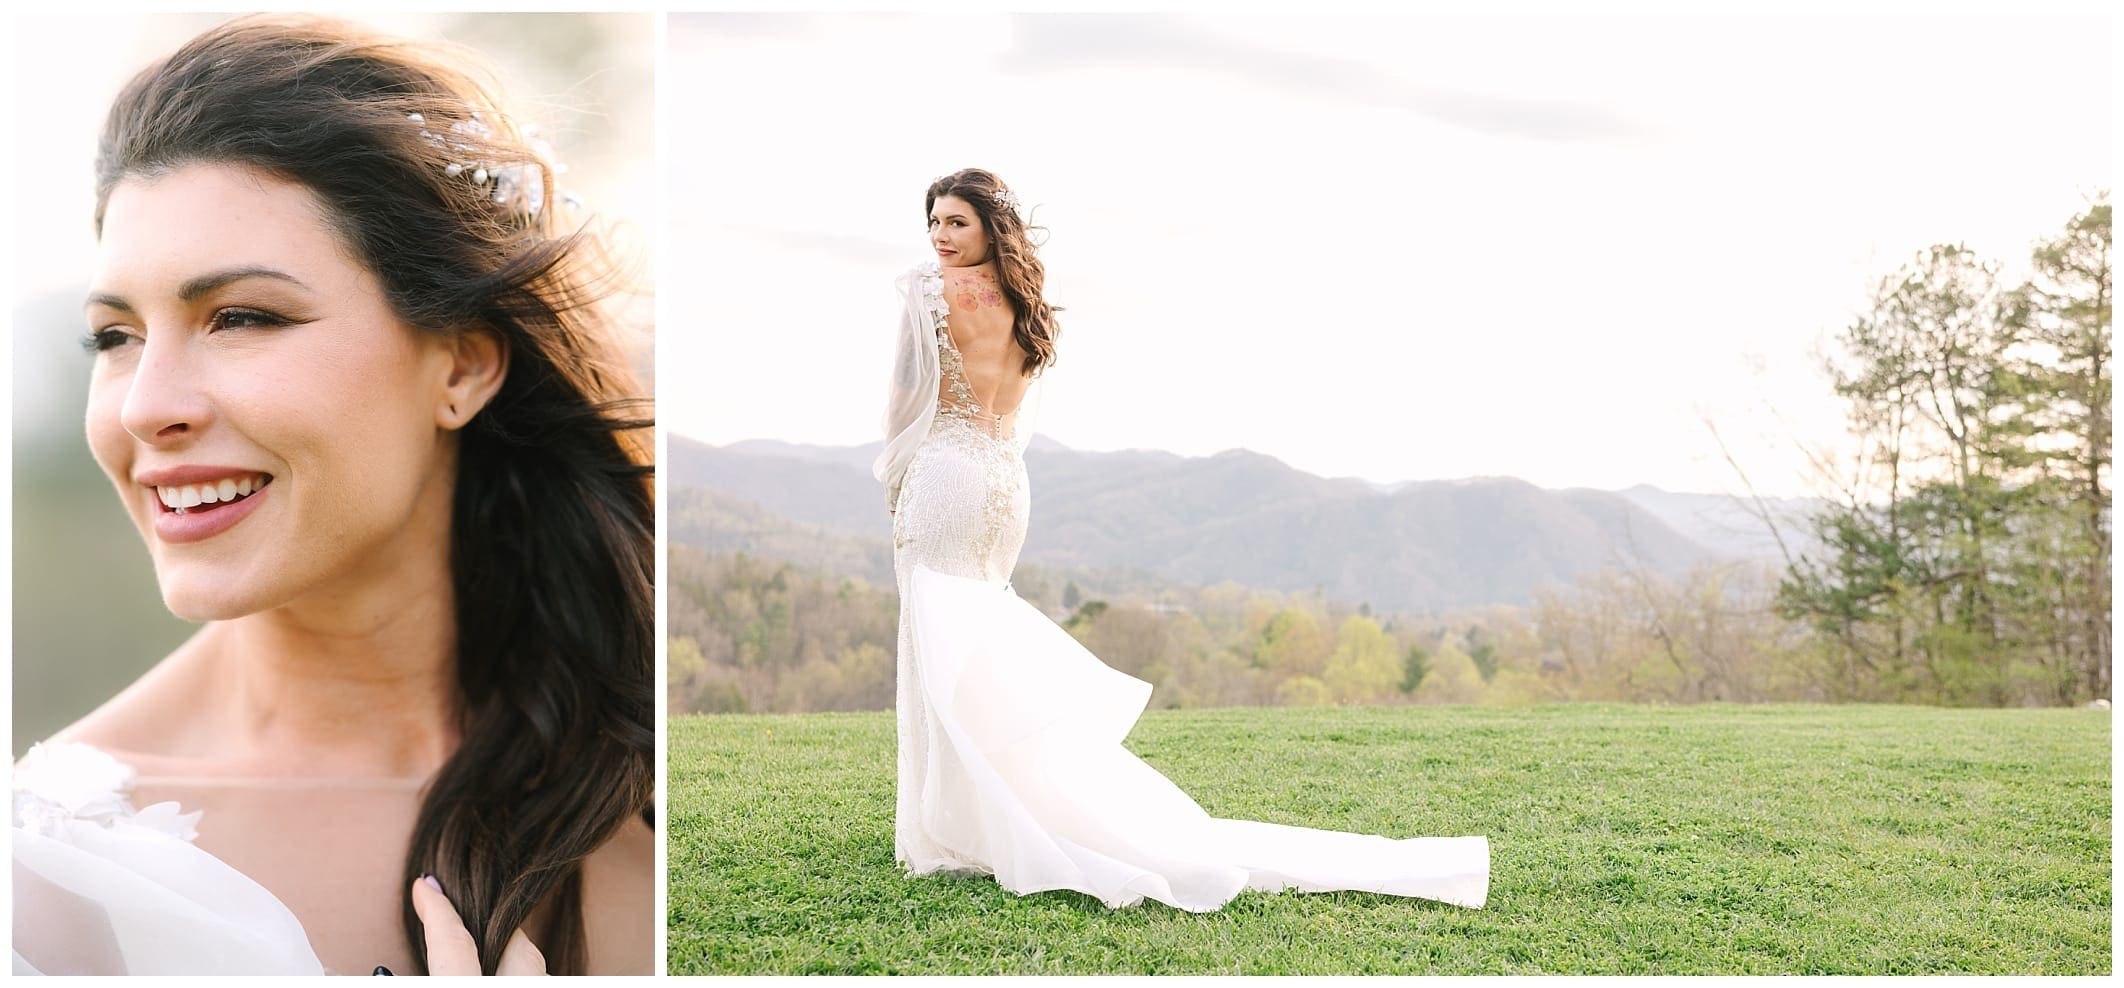 Custom bridal gown with sleeves, open back and long train by Angela Kim Couture. Captured at The Ridge in Asheville by Kathy Beaver Photography, a North Carolina Wedding Photographer.